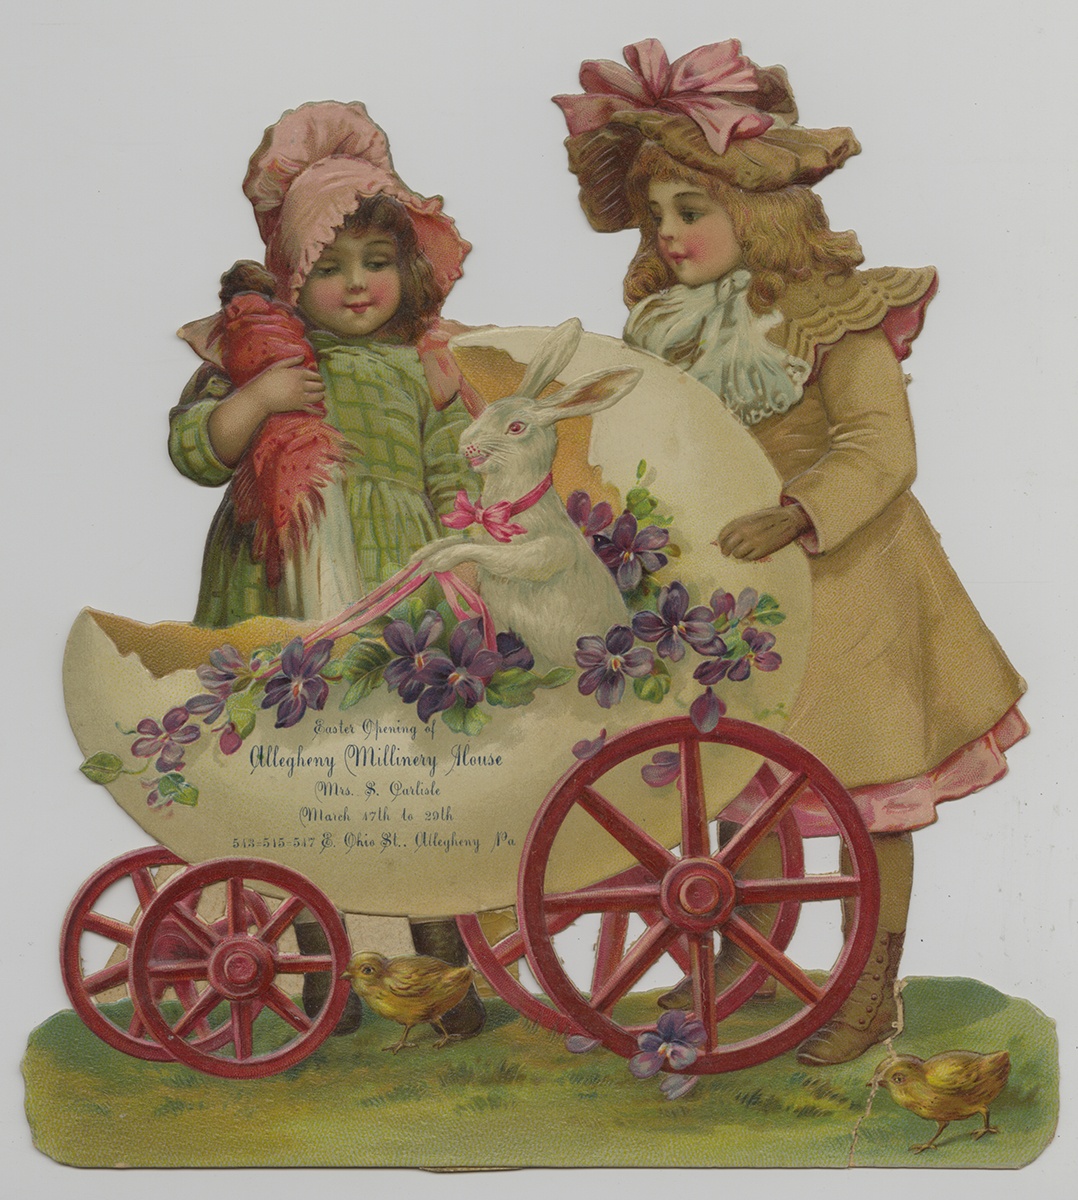 Easter advertising card from the Allegheny Millinery House, c. 1903.